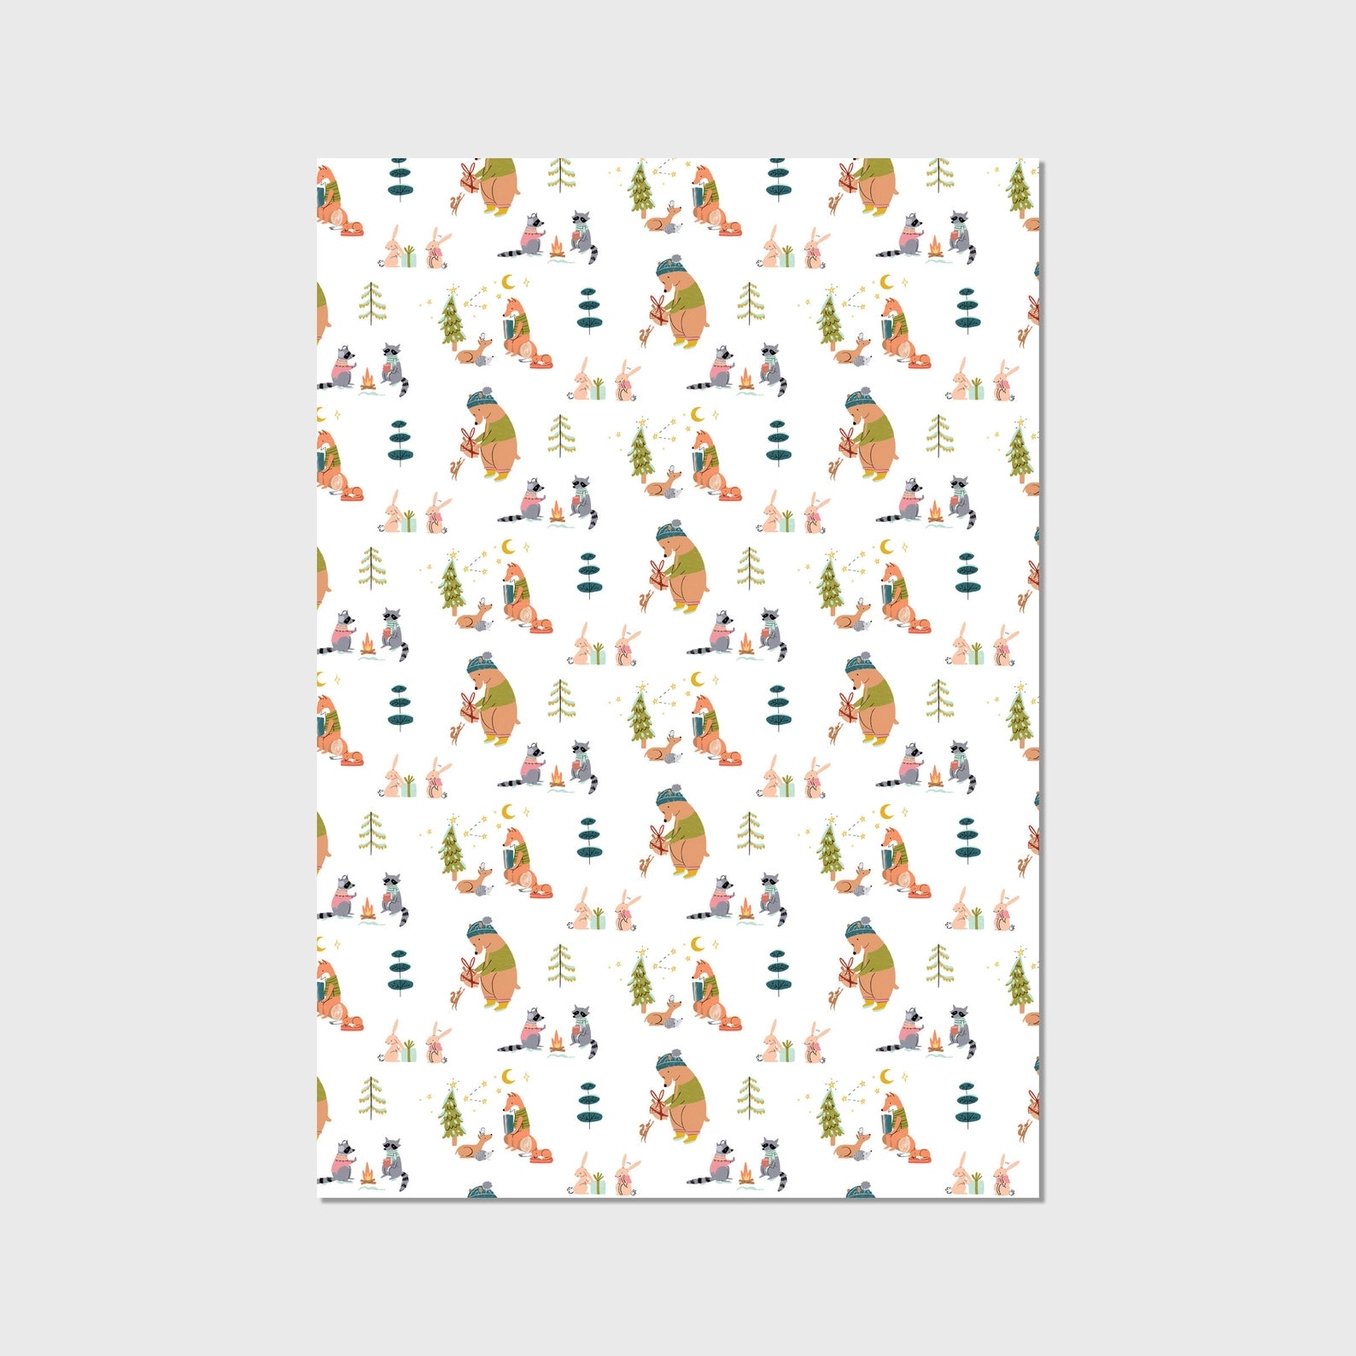 Woodland Animal Christmas Wrapping Paper- 3 sheet roll – The Regal Find